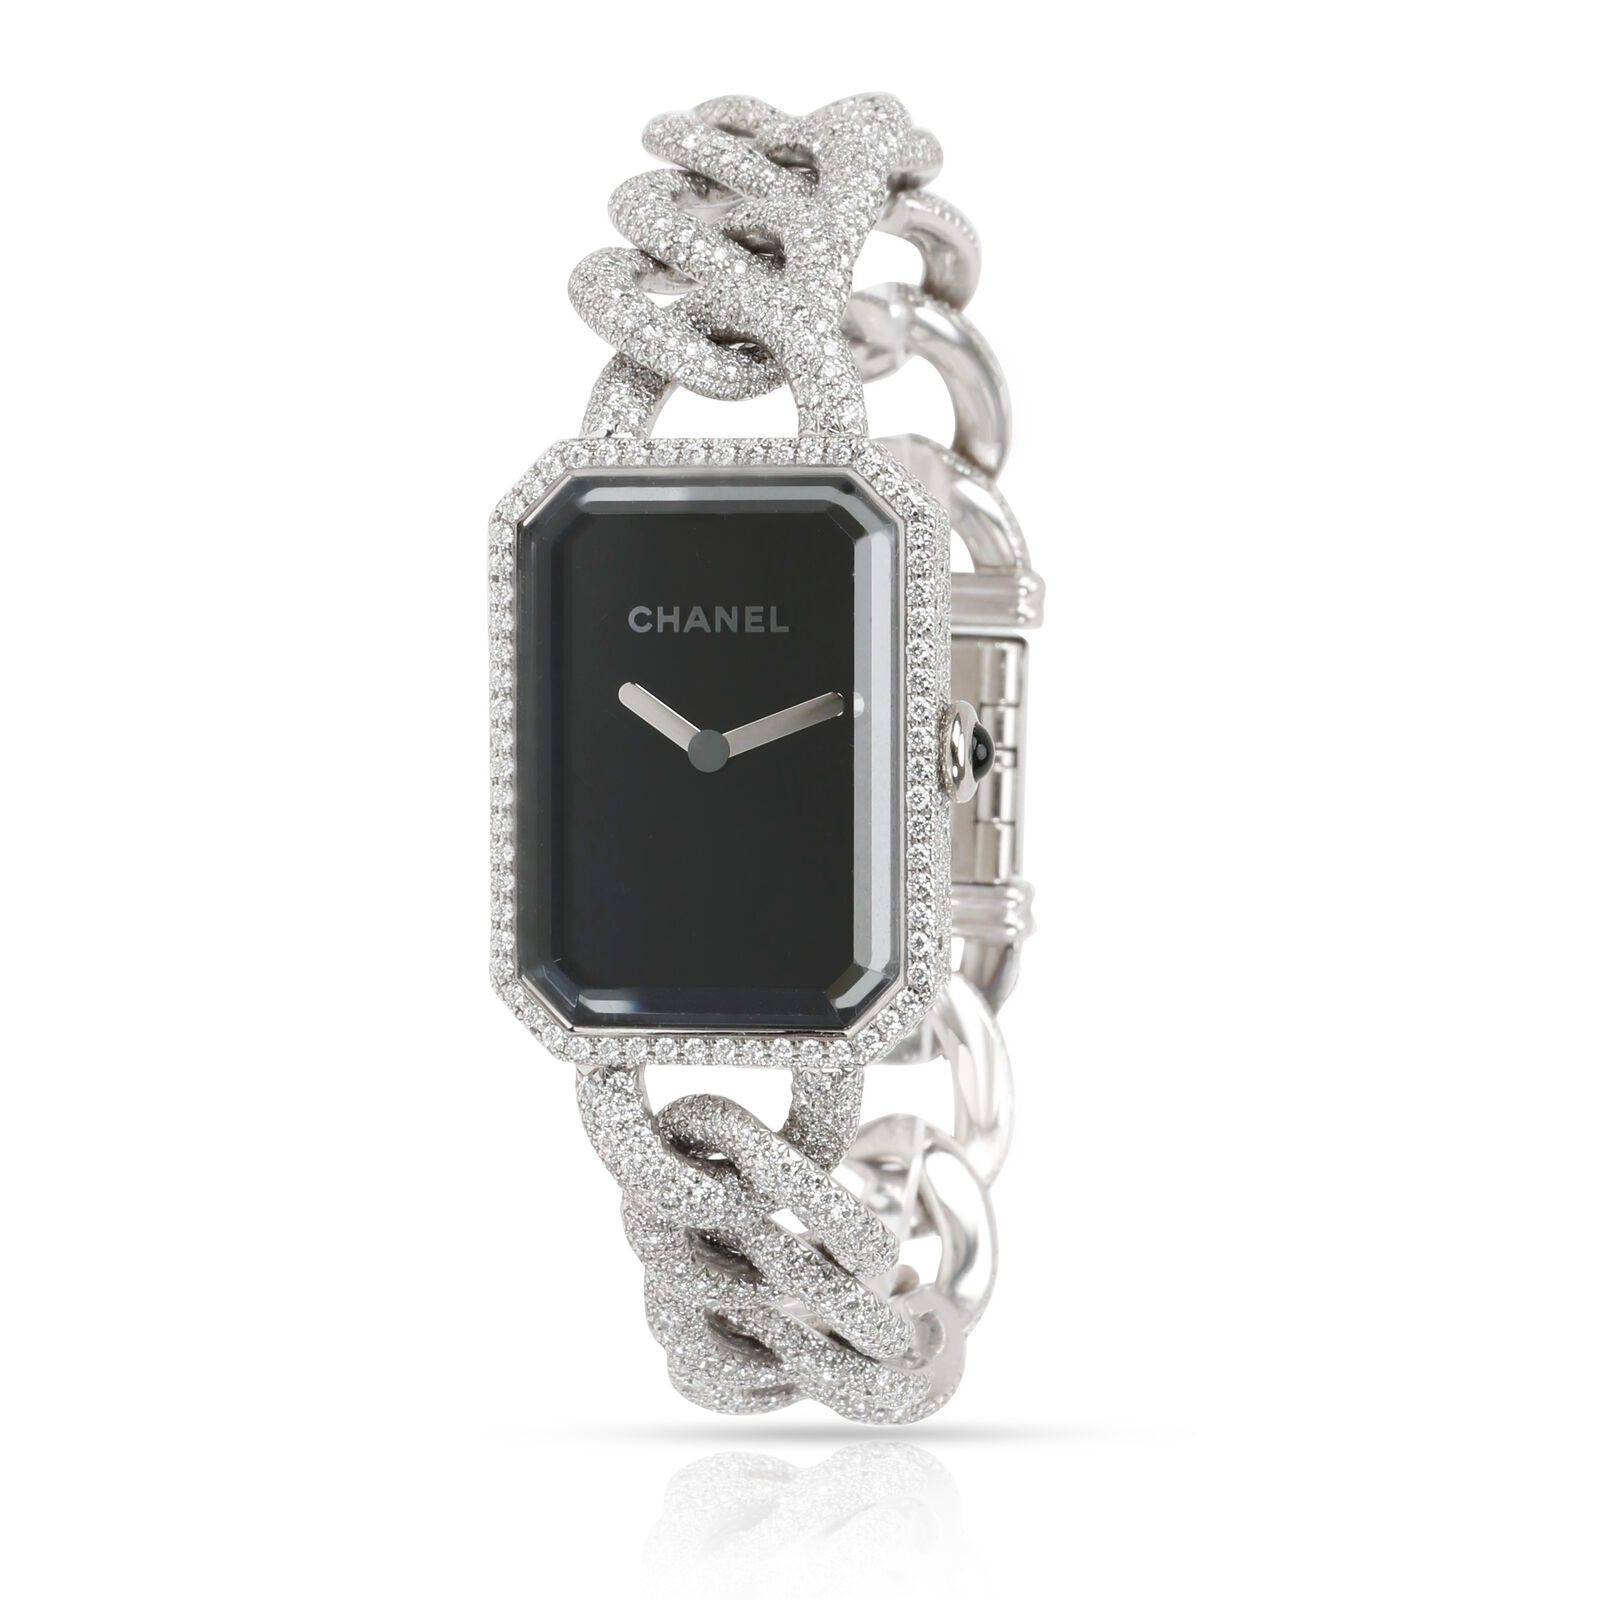 Image of Chanel Premiere H3260 Women's Diamond Watch in 18kt White Gold